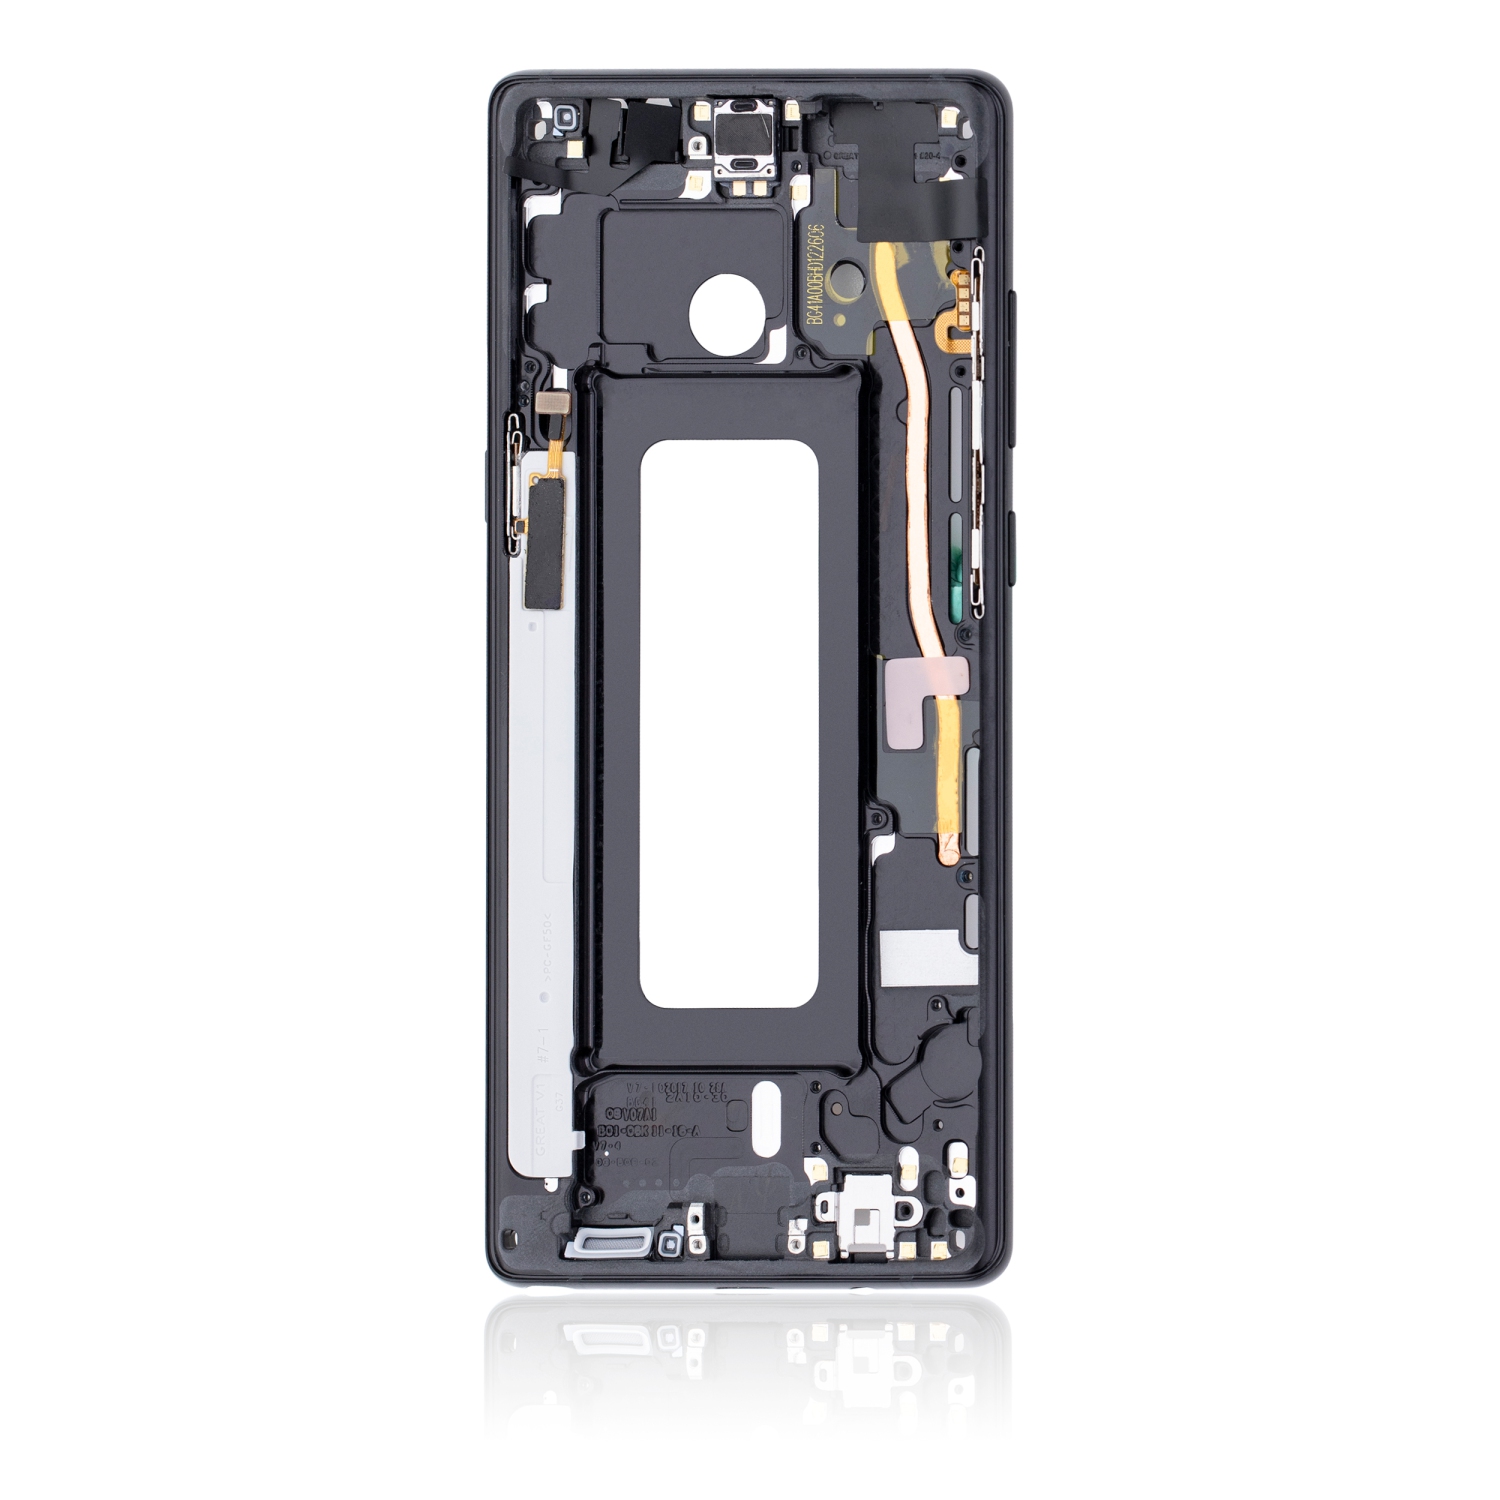 Replacement Mid-Frame Housing Compatible For Samsung Galaxy Note 8 (With Small Parts) (Black)